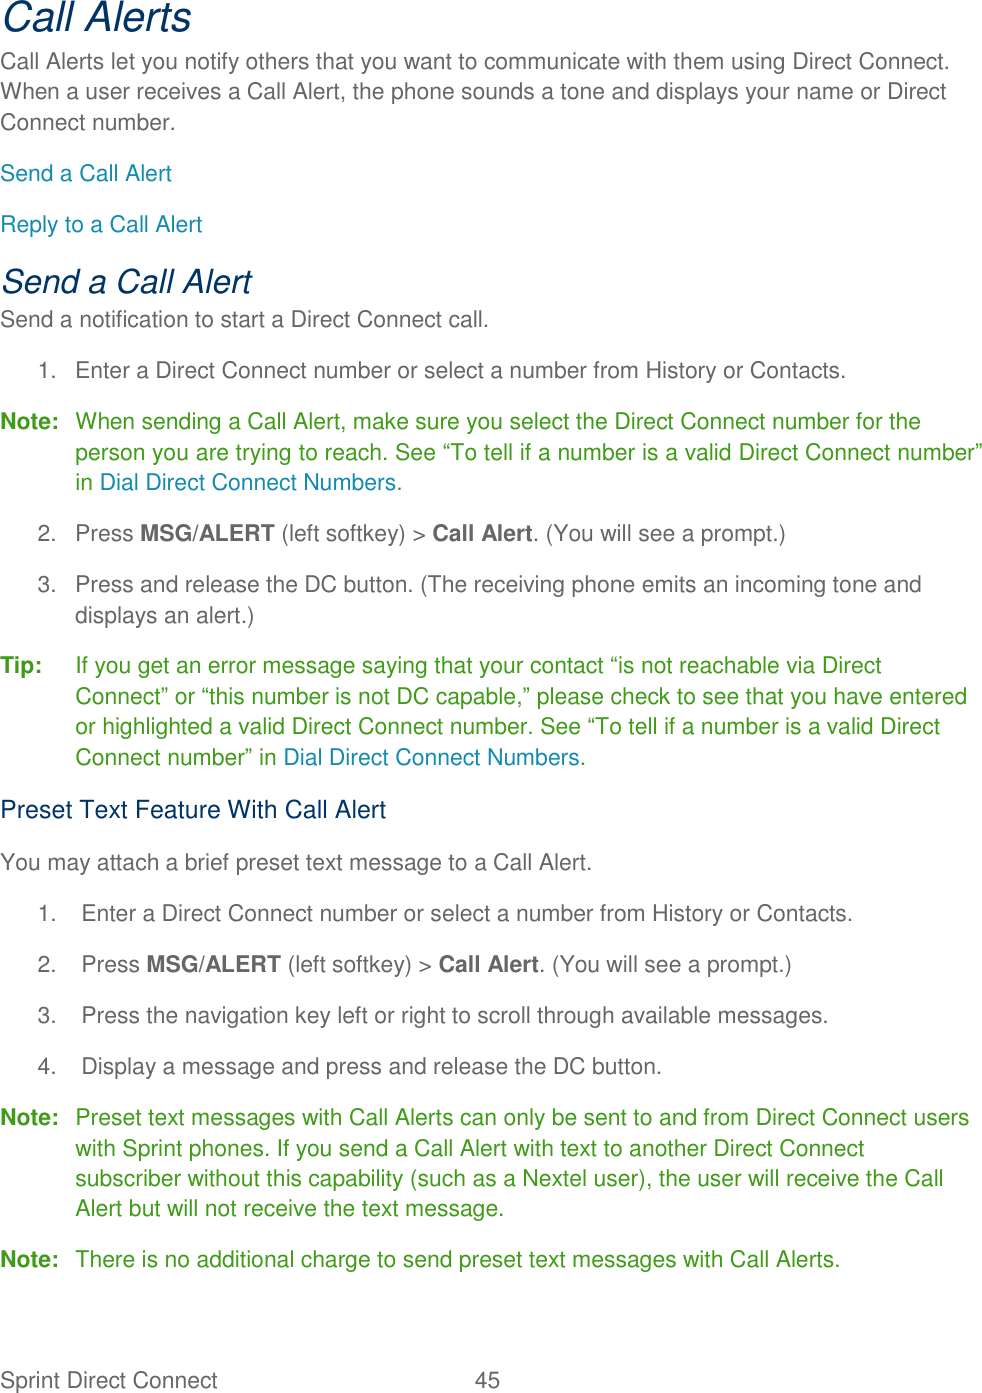  Sprint Direct Connect  45   Call Alerts Call Alerts let you notify others that you want to communicate with them using Direct Connect. When a user receives a Call Alert, the phone sounds a tone and displays your name or Direct Connect number. Send a Call Alert Reply to a Call Alert Send a Call Alert Send a notification to start a Direct Connect call. 1.  Enter a Direct Connect number or select a number from History or Contacts. Note:  When sending a Call Alert, make sure you select the Direct Connect number for the person you are trying to reach. See ―To tell if a number is a valid Direct Connect number‖ in Dial Direct Connect Numbers. 2.  Press MSG/ALERT (left softkey) &gt; Call Alert. (You will see a prompt.) 3.  Press and release the DC button. (The receiving phone emits an incoming tone and displays an alert.) Tip:  If you get an error message saying that your contact ―is not reachable via Direct Connect‖ or ―this number is not DC capable,‖ please check to see that you have entered or highlighted a valid Direct Connect number. See ―To tell if a number is a valid Direct Connect number‖ in Dial Direct Connect Numbers. Preset Text Feature With Call Alert You may attach a brief preset text message to a Call Alert. 1.  Enter a Direct Connect number or select a number from History or Contacts. 2.  Press MSG/ALERT (left softkey) &gt; Call Alert. (You will see a prompt.) 3.  Press the navigation key left or right to scroll through available messages. 4.  Display a message and press and release the DC button. Note:  Preset text messages with Call Alerts can only be sent to and from Direct Connect users with Sprint phones. If you send a Call Alert with text to another Direct Connect subscriber without this capability (such as a Nextel user), the user will receive the Call Alert but will not receive the text message. Note:  There is no additional charge to send preset text messages with Call Alerts. 